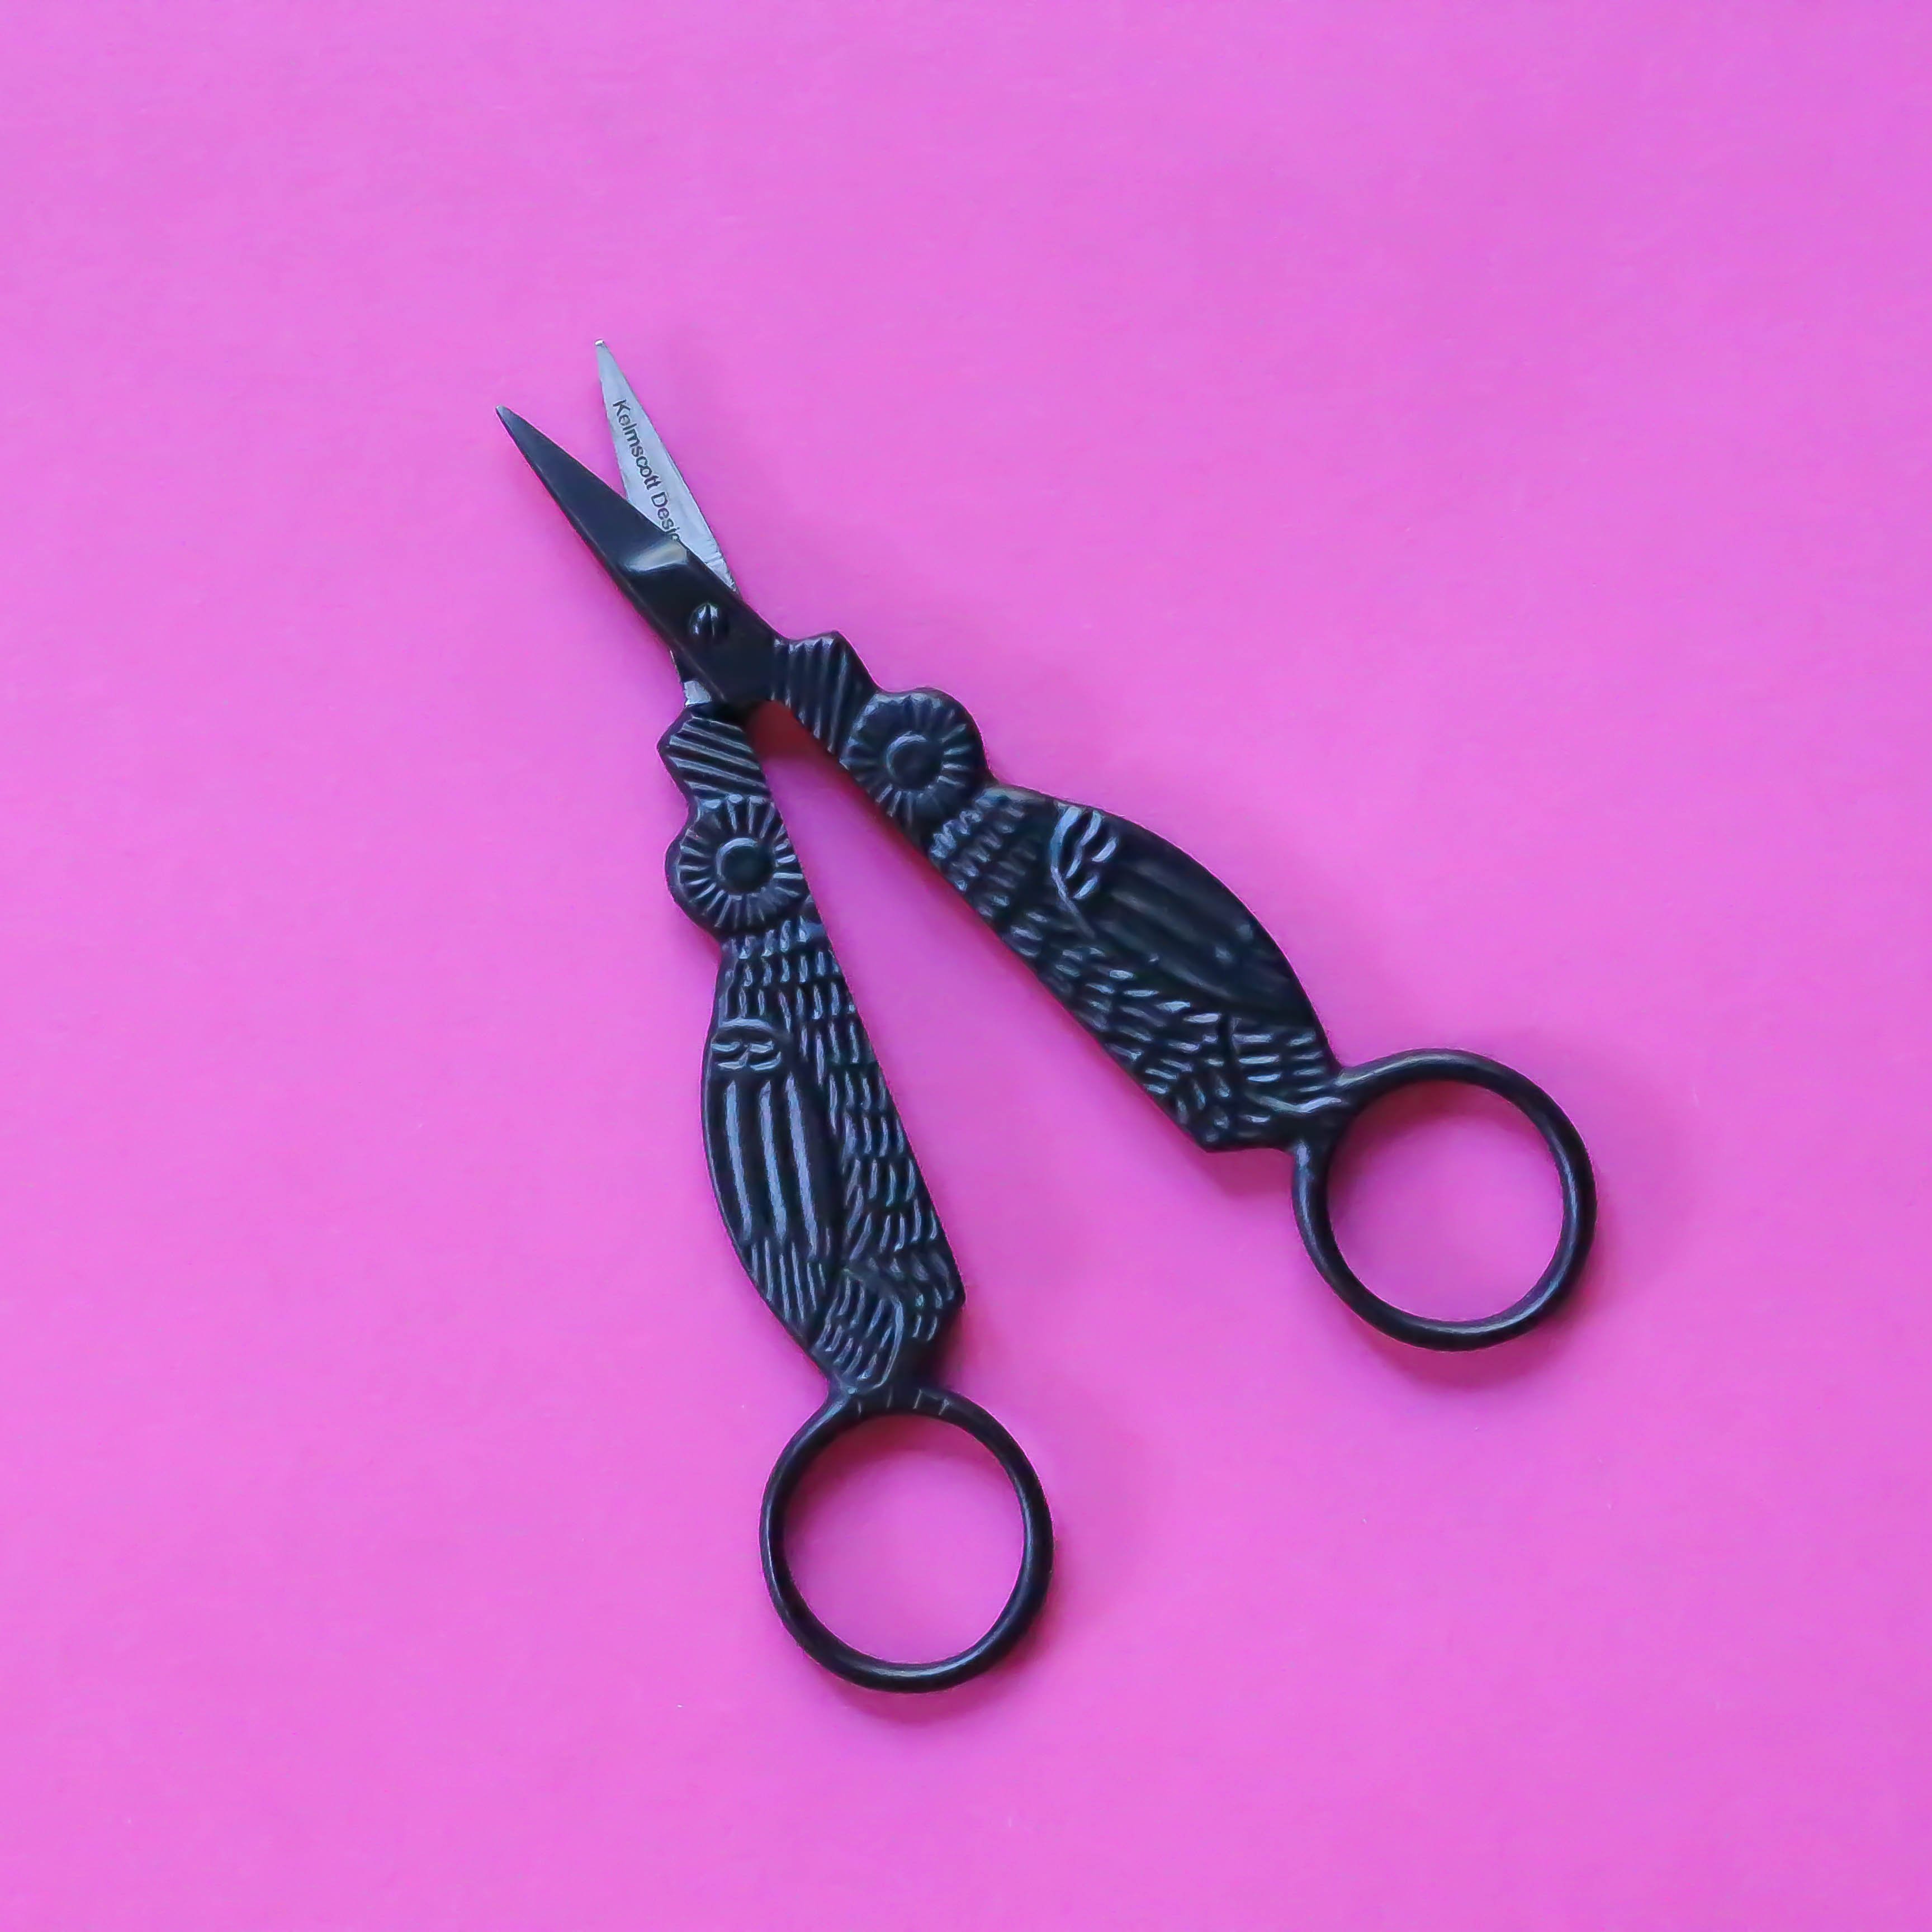 Black Owl Embroidery Scissors open on pink background